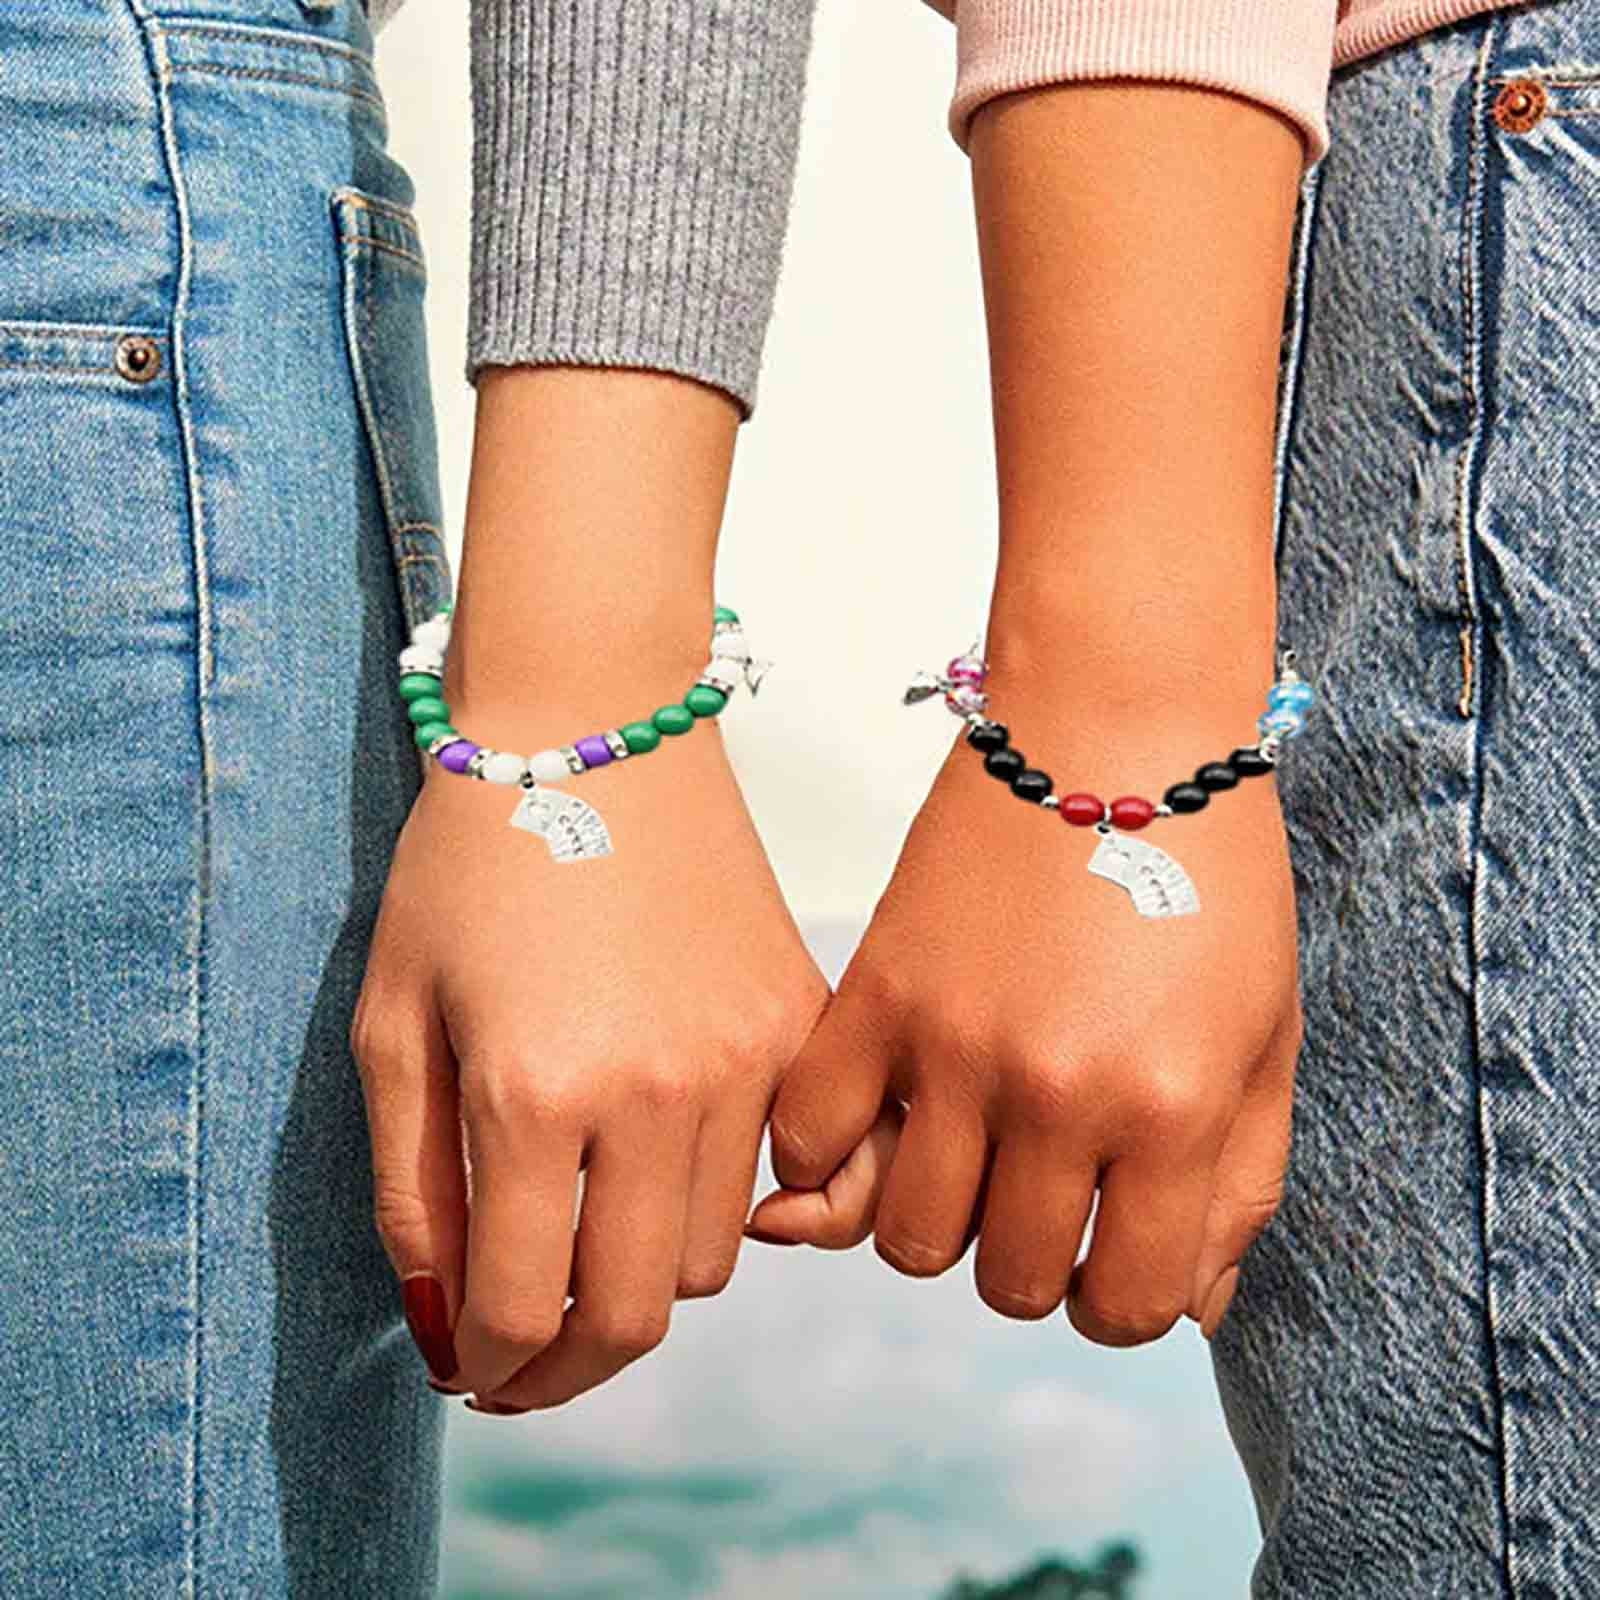 Amazon.com: Long Distance Touch Bracelets Set of 2 - Lovers Are Closer Than  Ever, Remote Smart Connection Love Bracelet, Send SOS SMS ,For Couples  Lovers Family Kids Friends, Relationship Couples Gifts Black: